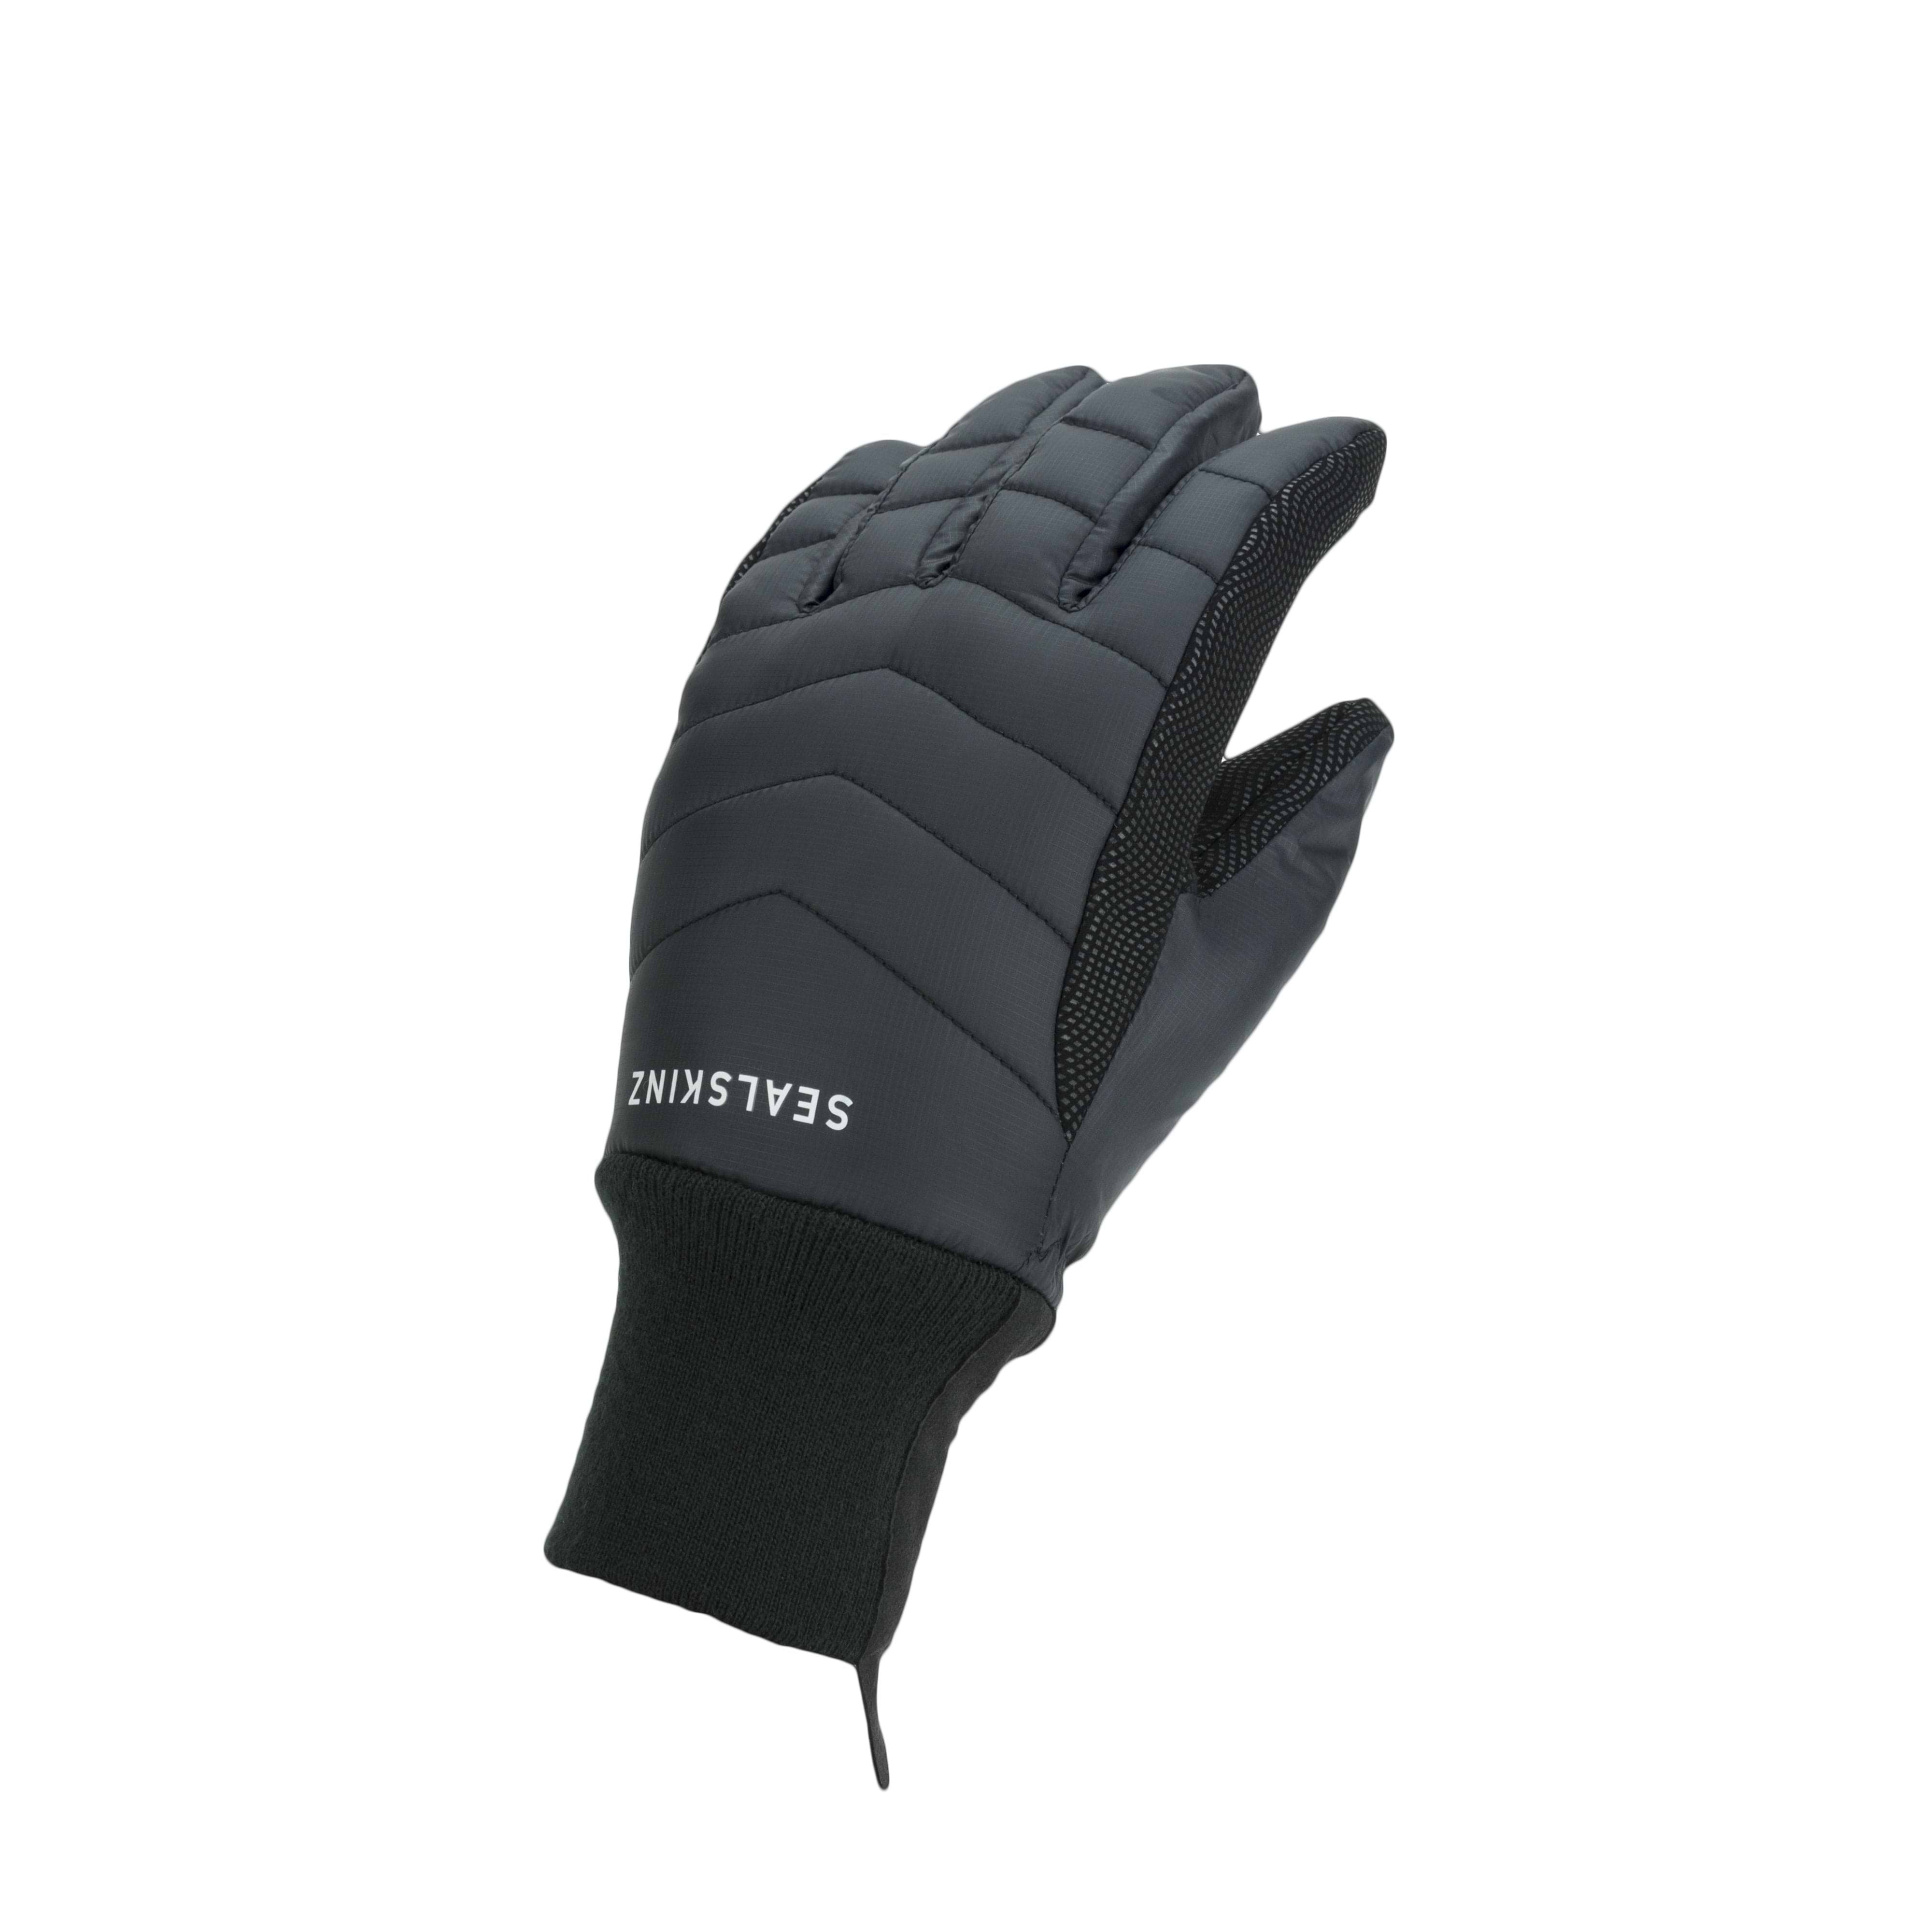 Sealskinz Twyford Waterproof Cold Weather Work Glove with Fusion Control, Natural / L